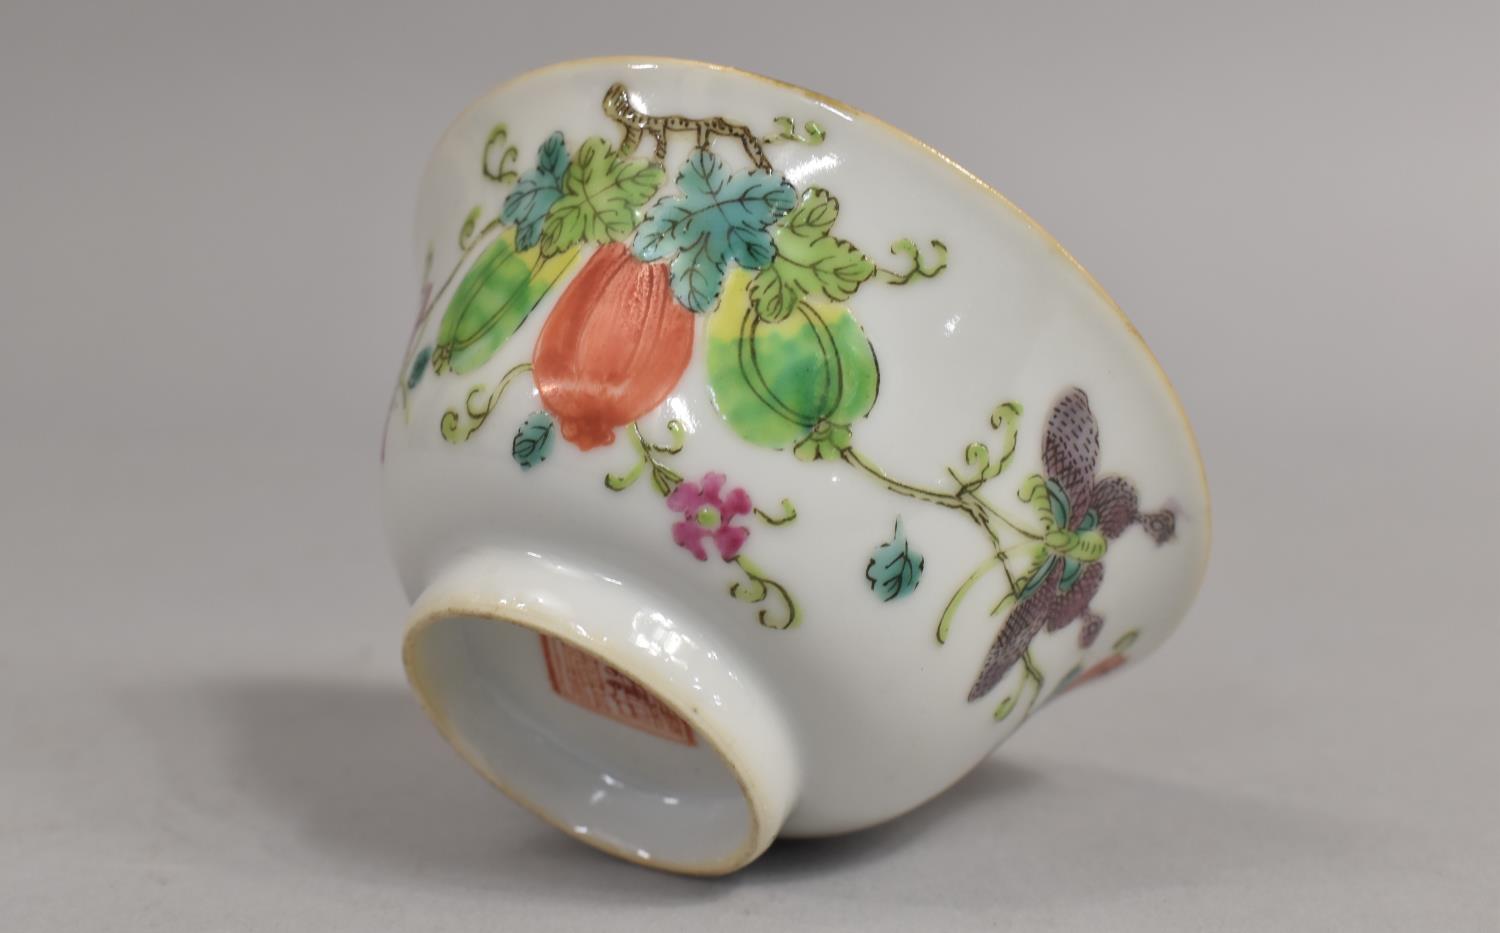 A Small Late 19th/Early 20th Century Chinese Porcelain Tea Bowl Decorated in the Famille Rose